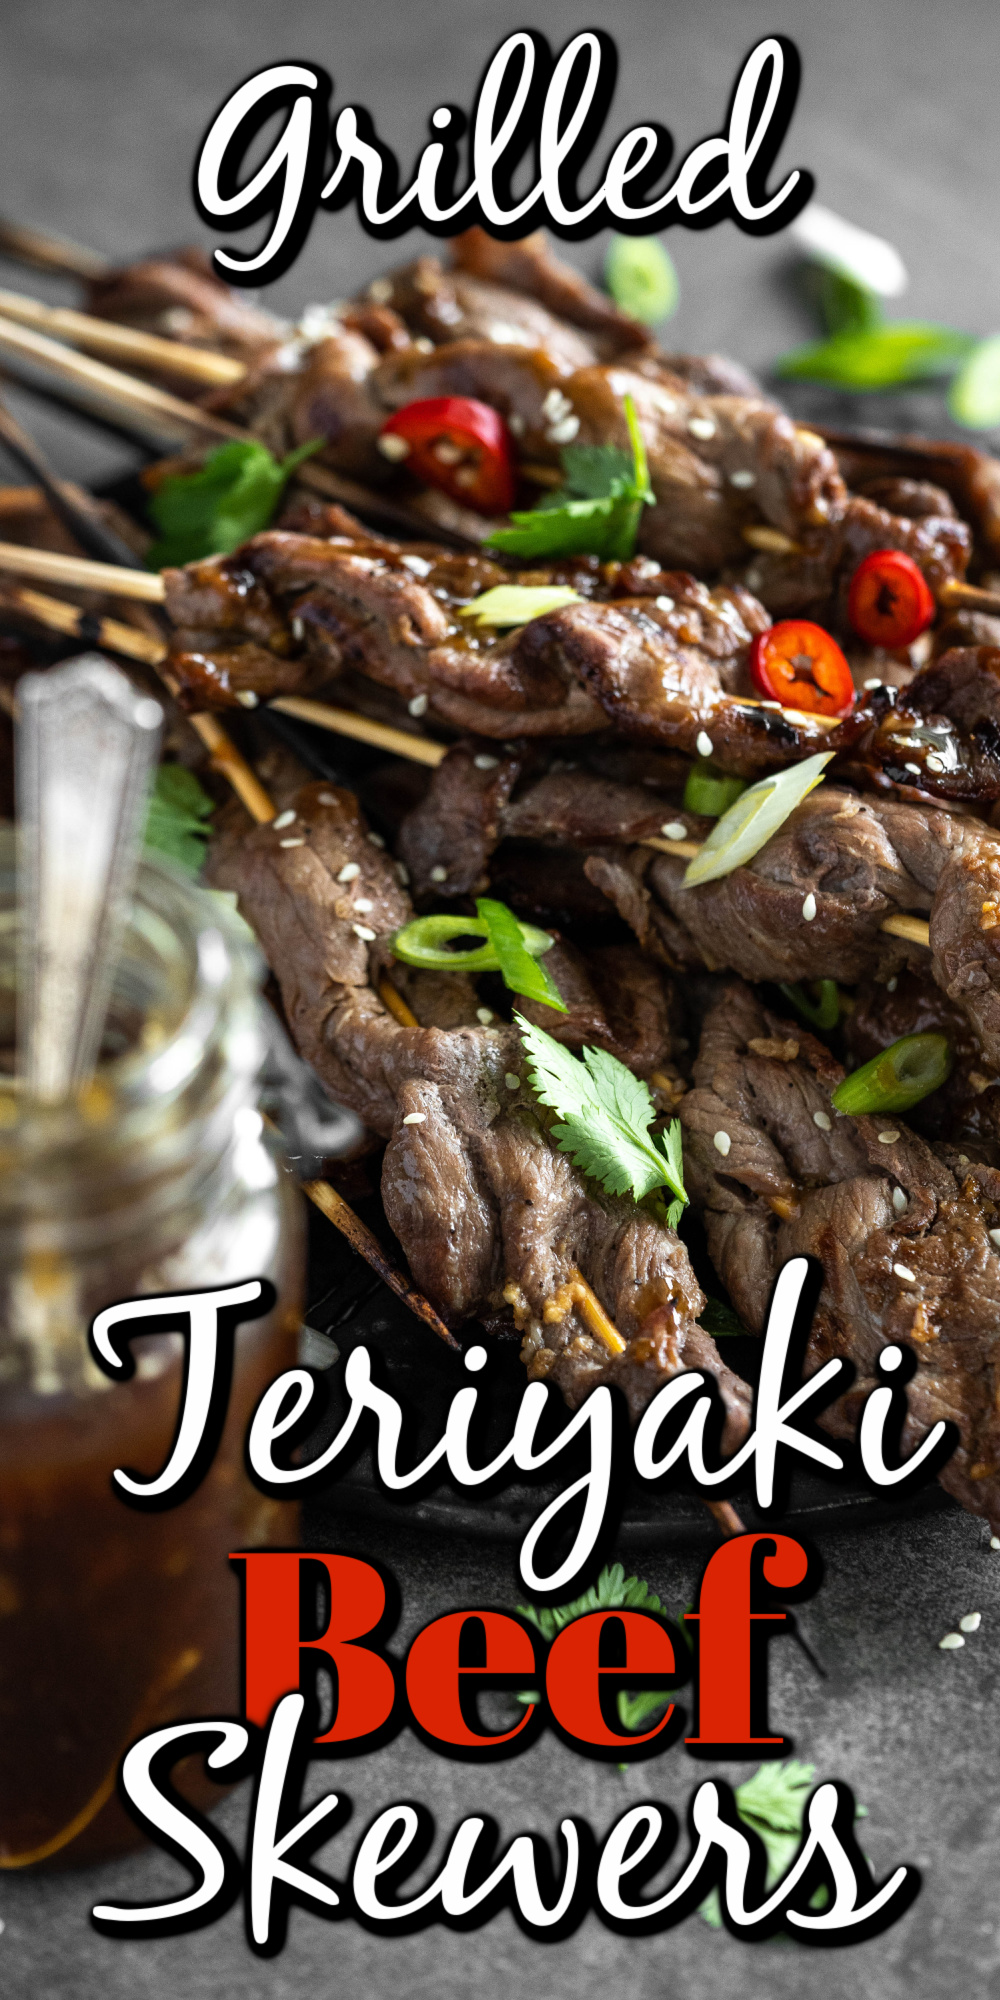 These Grilled Beef Teriyaki Skewers are full of Asian-inspired flavors that you are going to love. Did I mention they are easy to prepare!